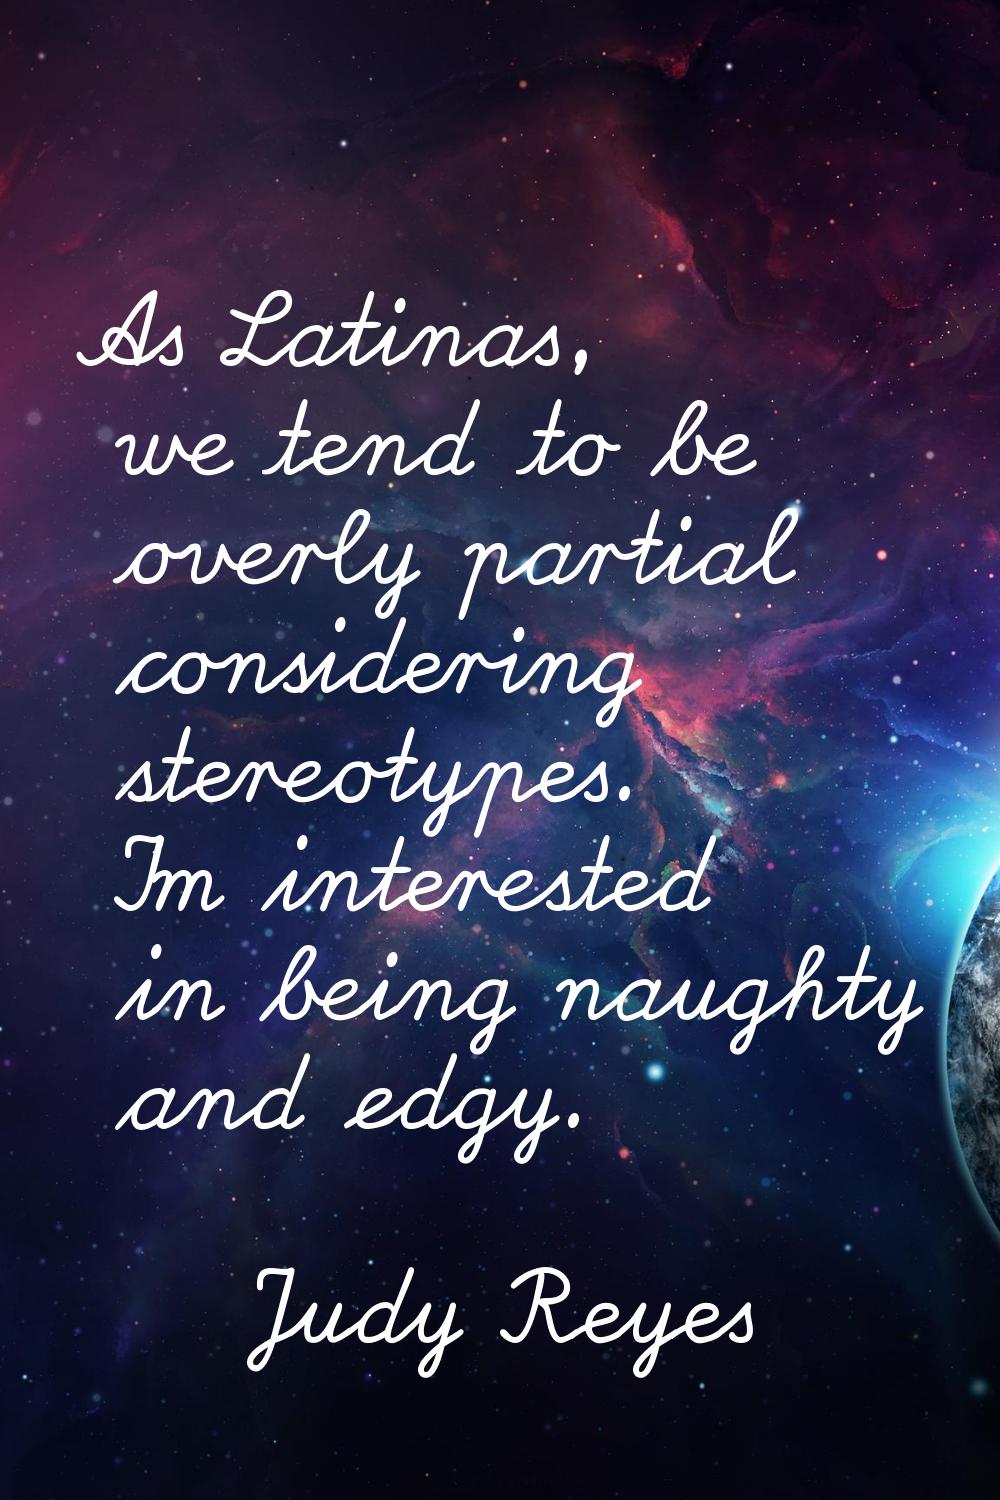 As Latinas, we tend to be overly partial considering stereotypes. I'm interested in being naughty a